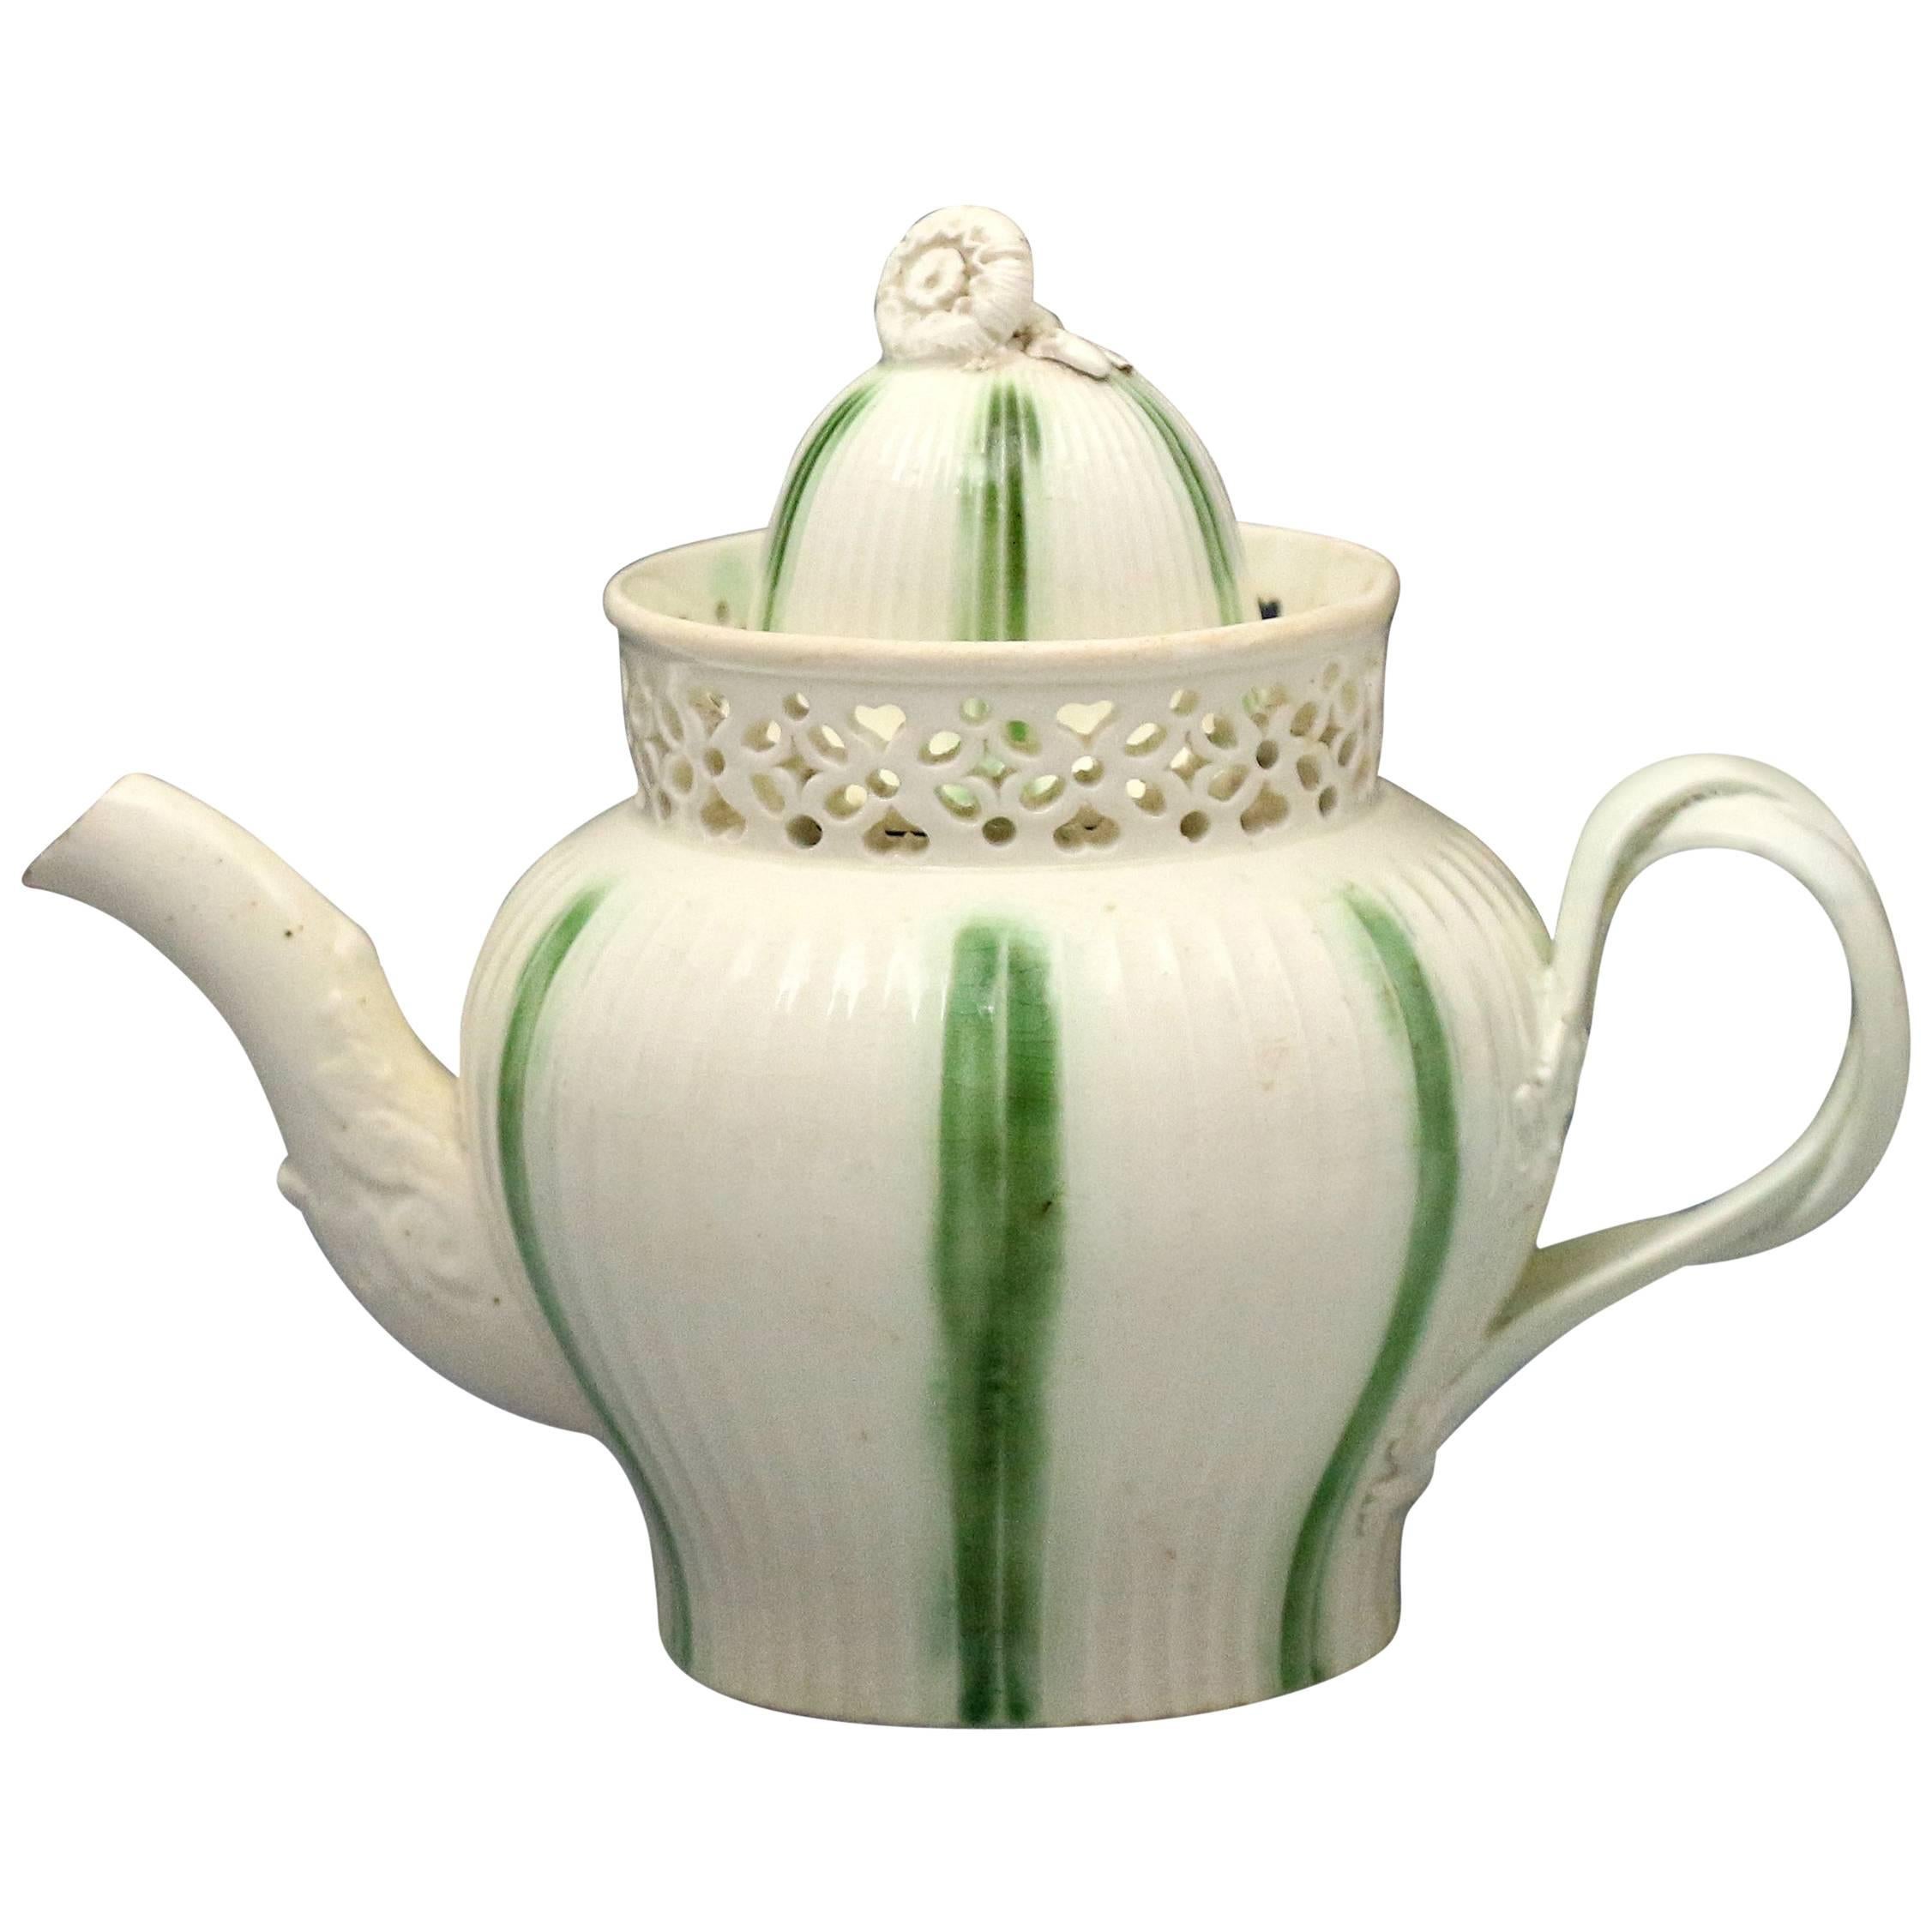 Antique English Creamware Pottery Teapot with Green Stripes, Late 18th Century For Sale